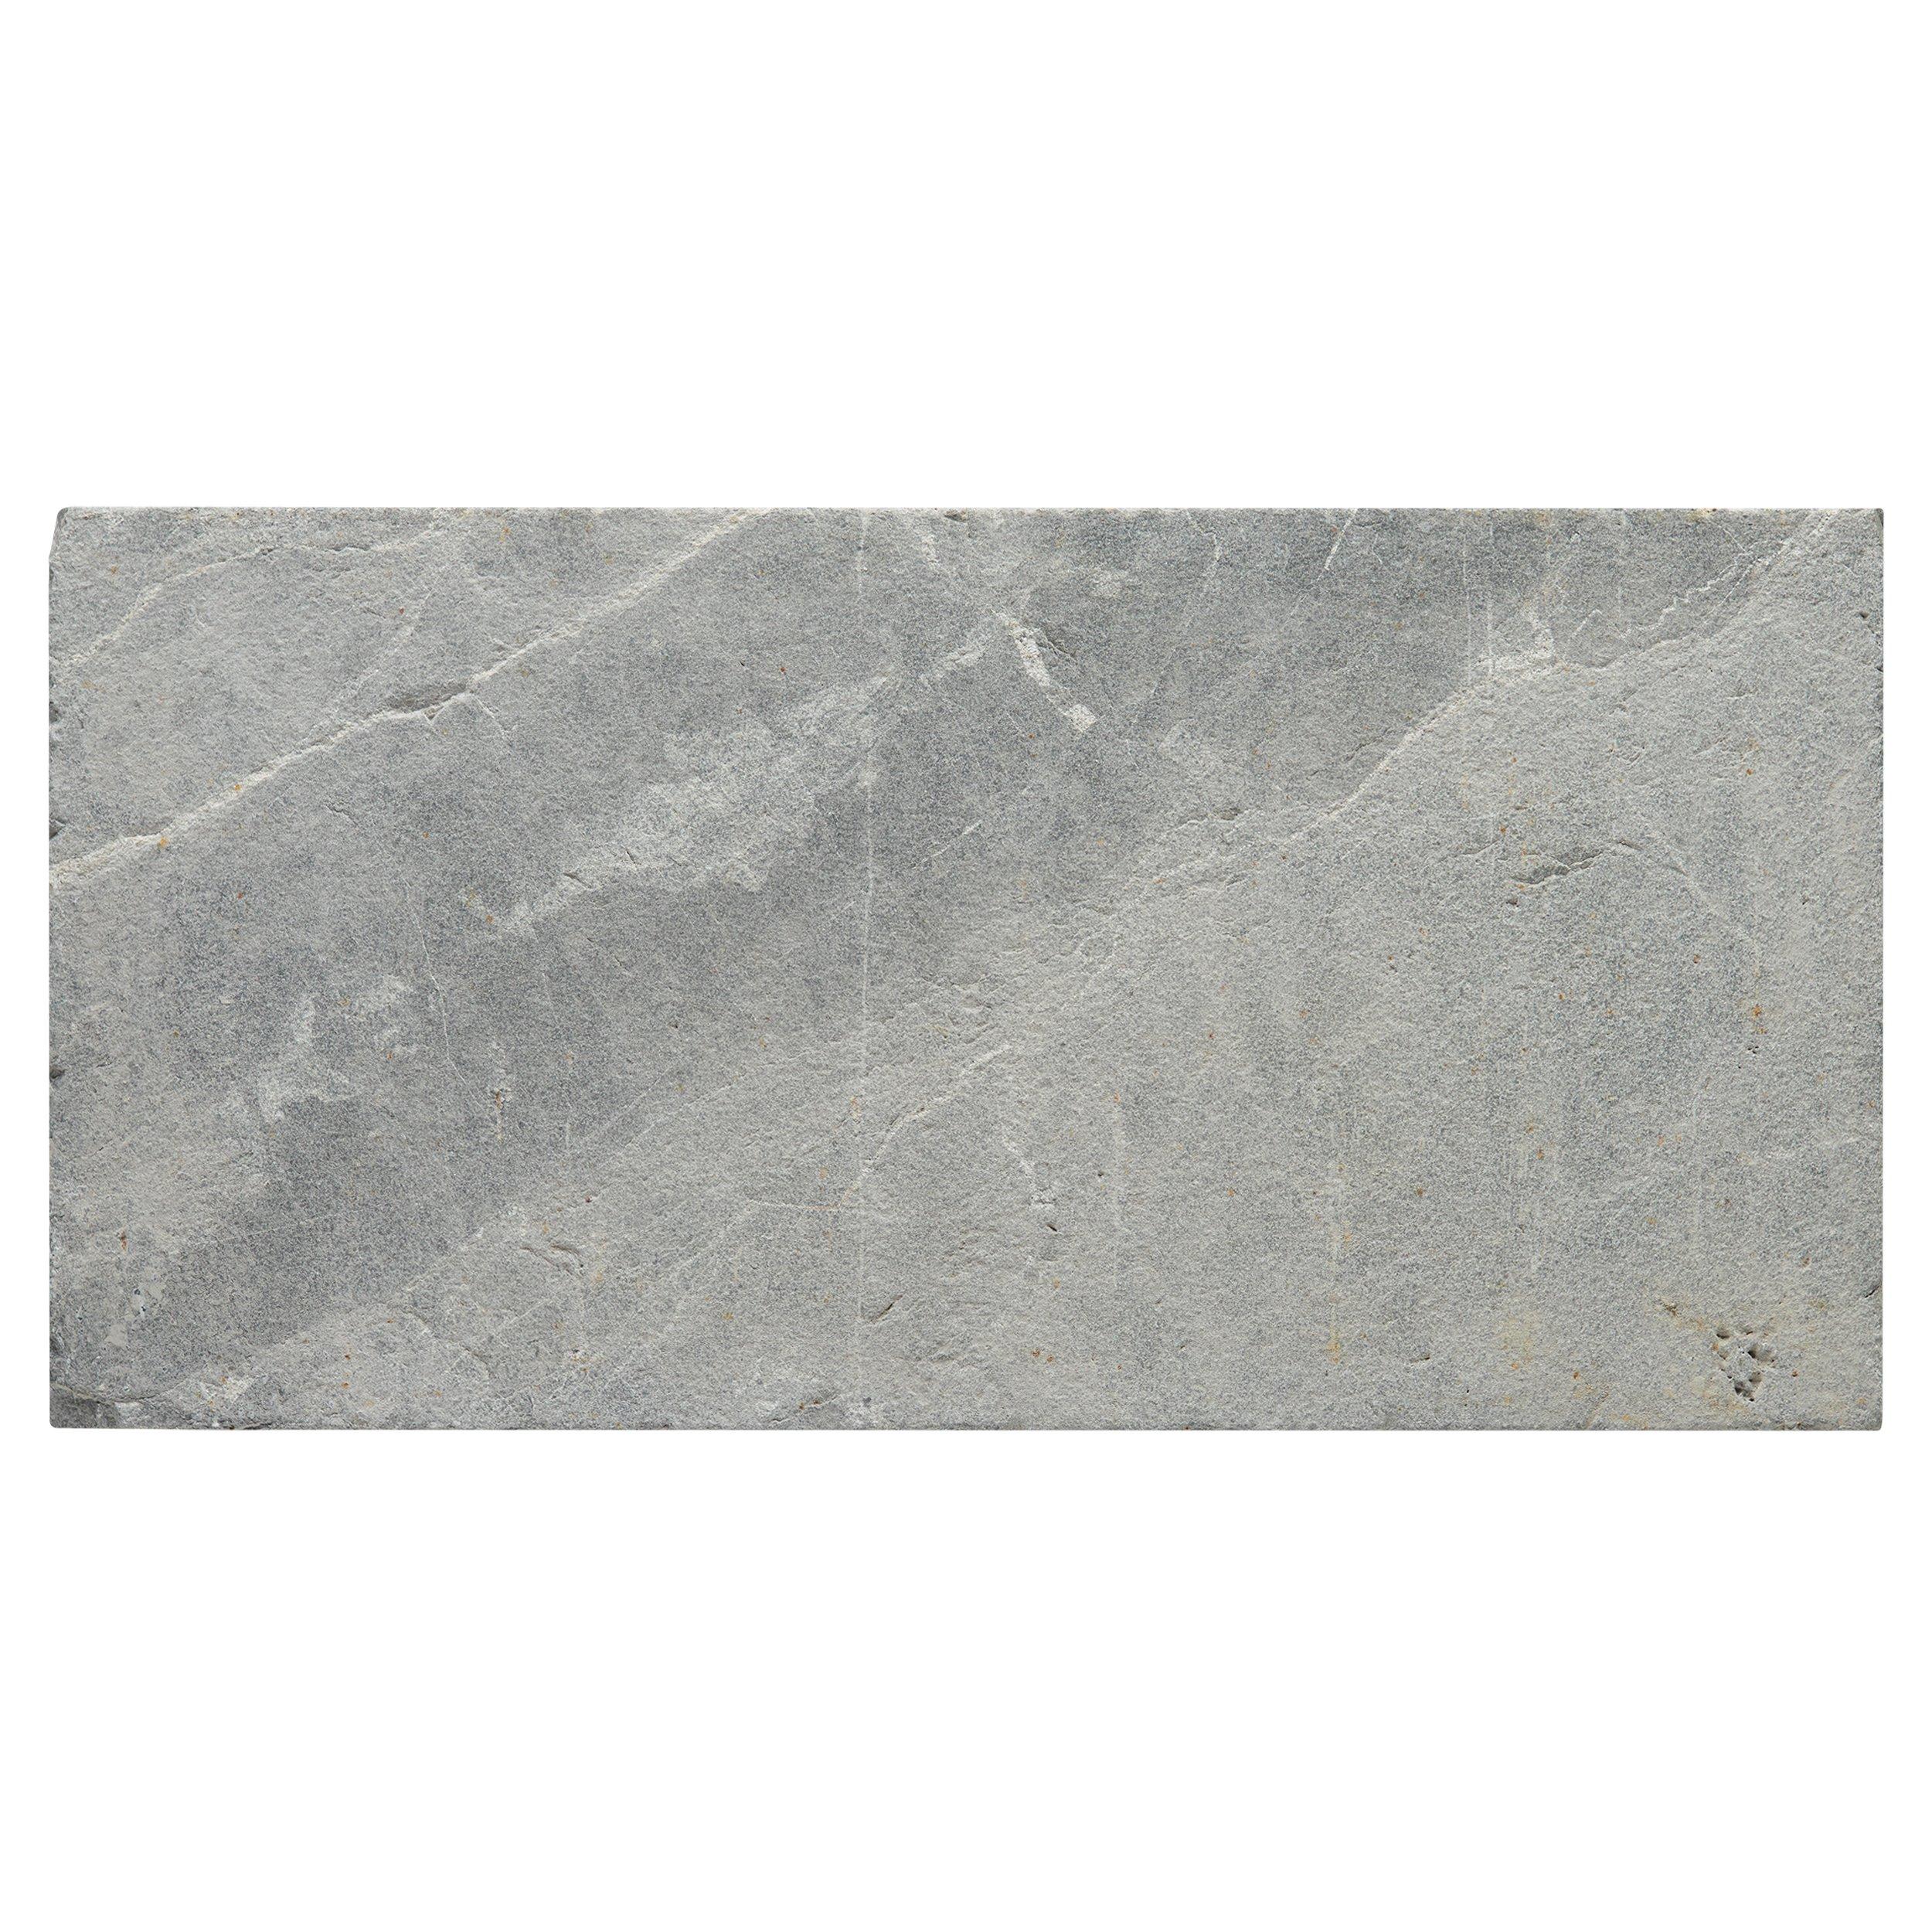 Tundra Marble Paver Tile